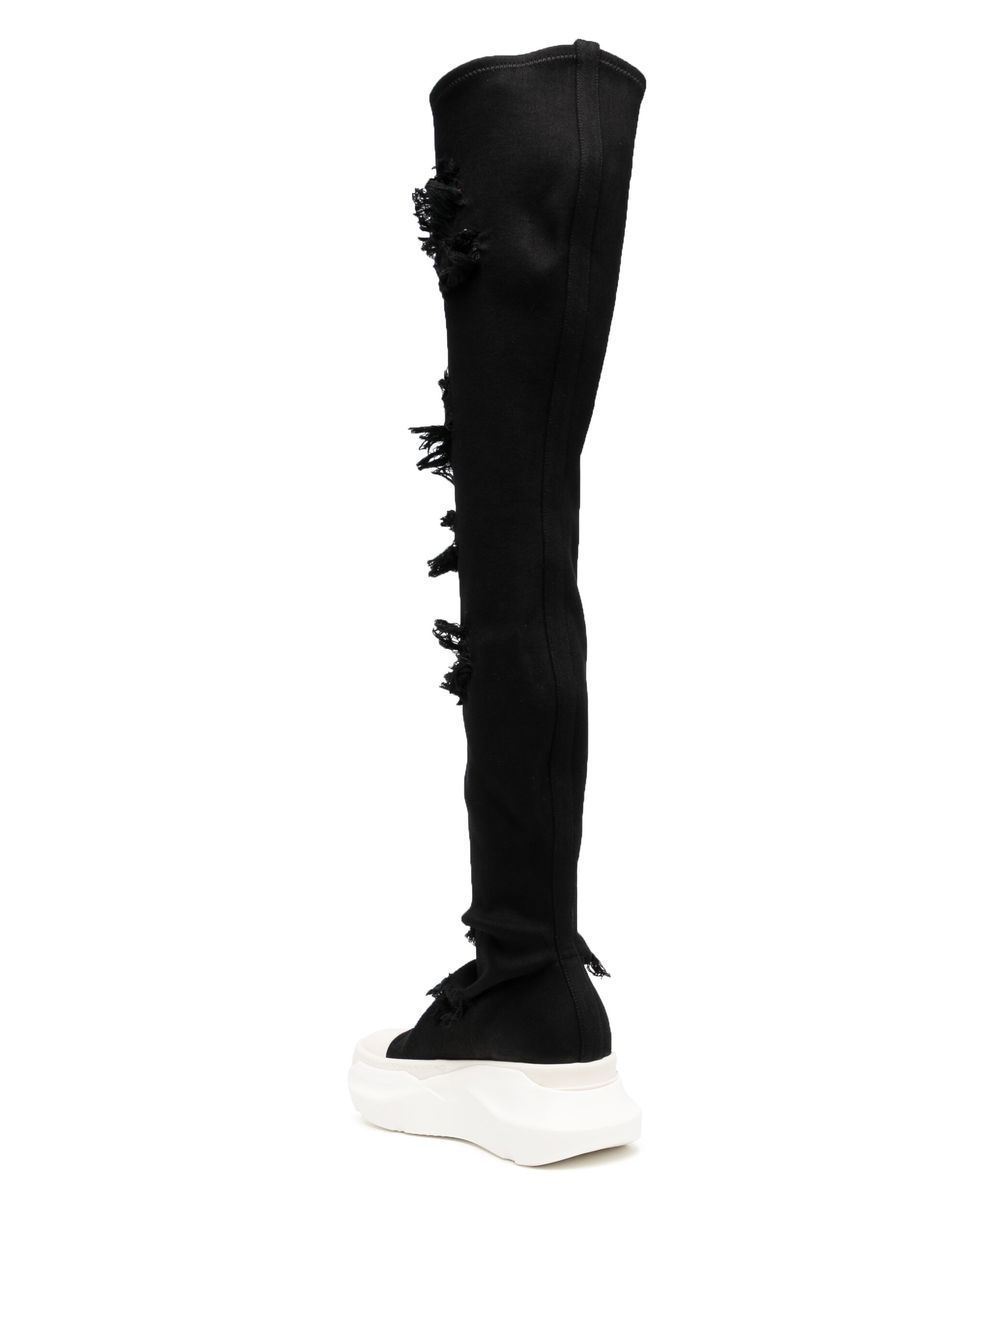 Rick Owens DRKSHDW Fogachine Abstract Slashed Stocking Boots 